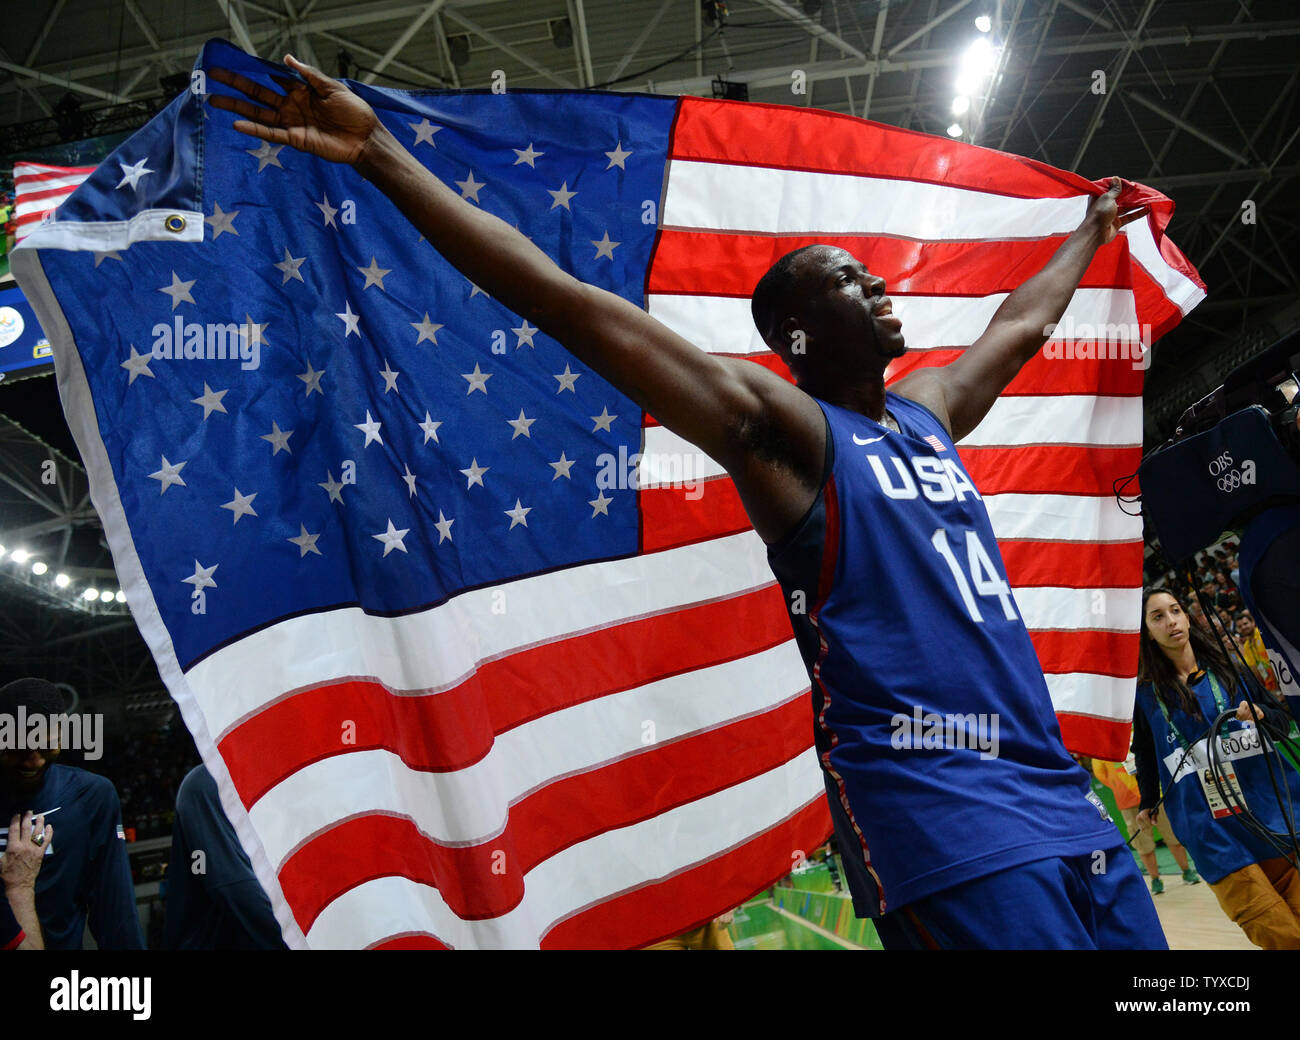 Draymond Green of the United States celebrates after the game against Serbia in the Men's Basketball gold medal game between Serbia and the United States at Carioca Arena 1 at the 2016 Rio Summer Olympics in Rio de Janeiro, Brazil, on August 21, 2016. The United States defeated Serbia 96-66 to win its third consecutive gold medal.  Photo by Kevin Dietsch/UPI Stock Photo